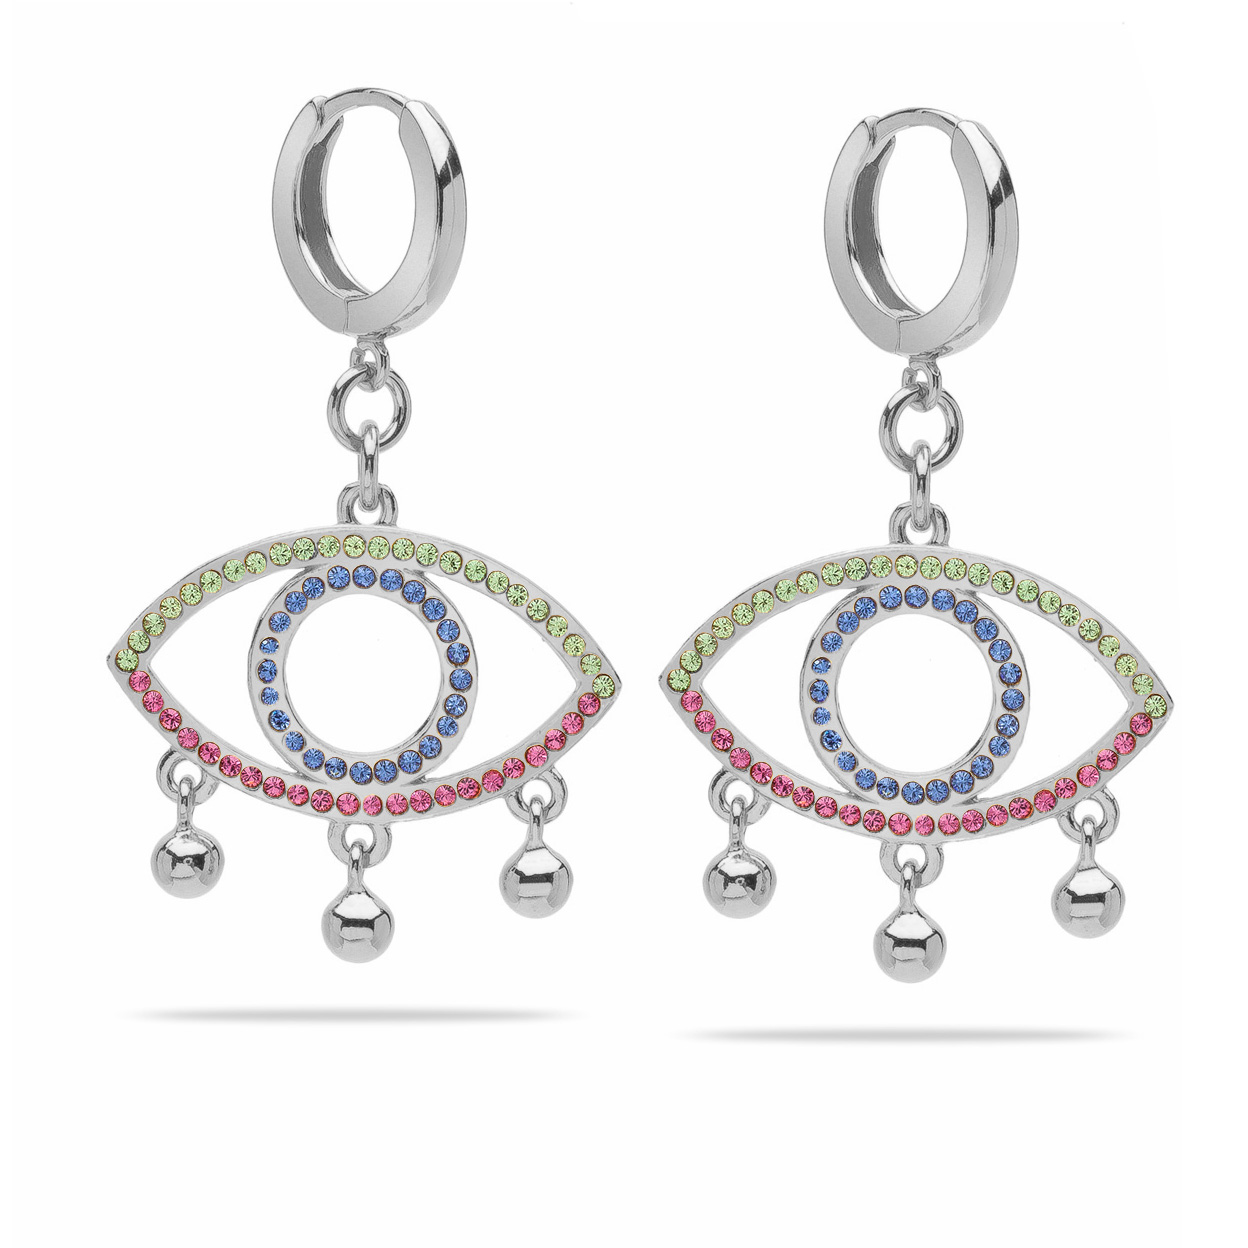 SILVER FACE EARRINGS WITH SWAROVSKI CRYSTALS